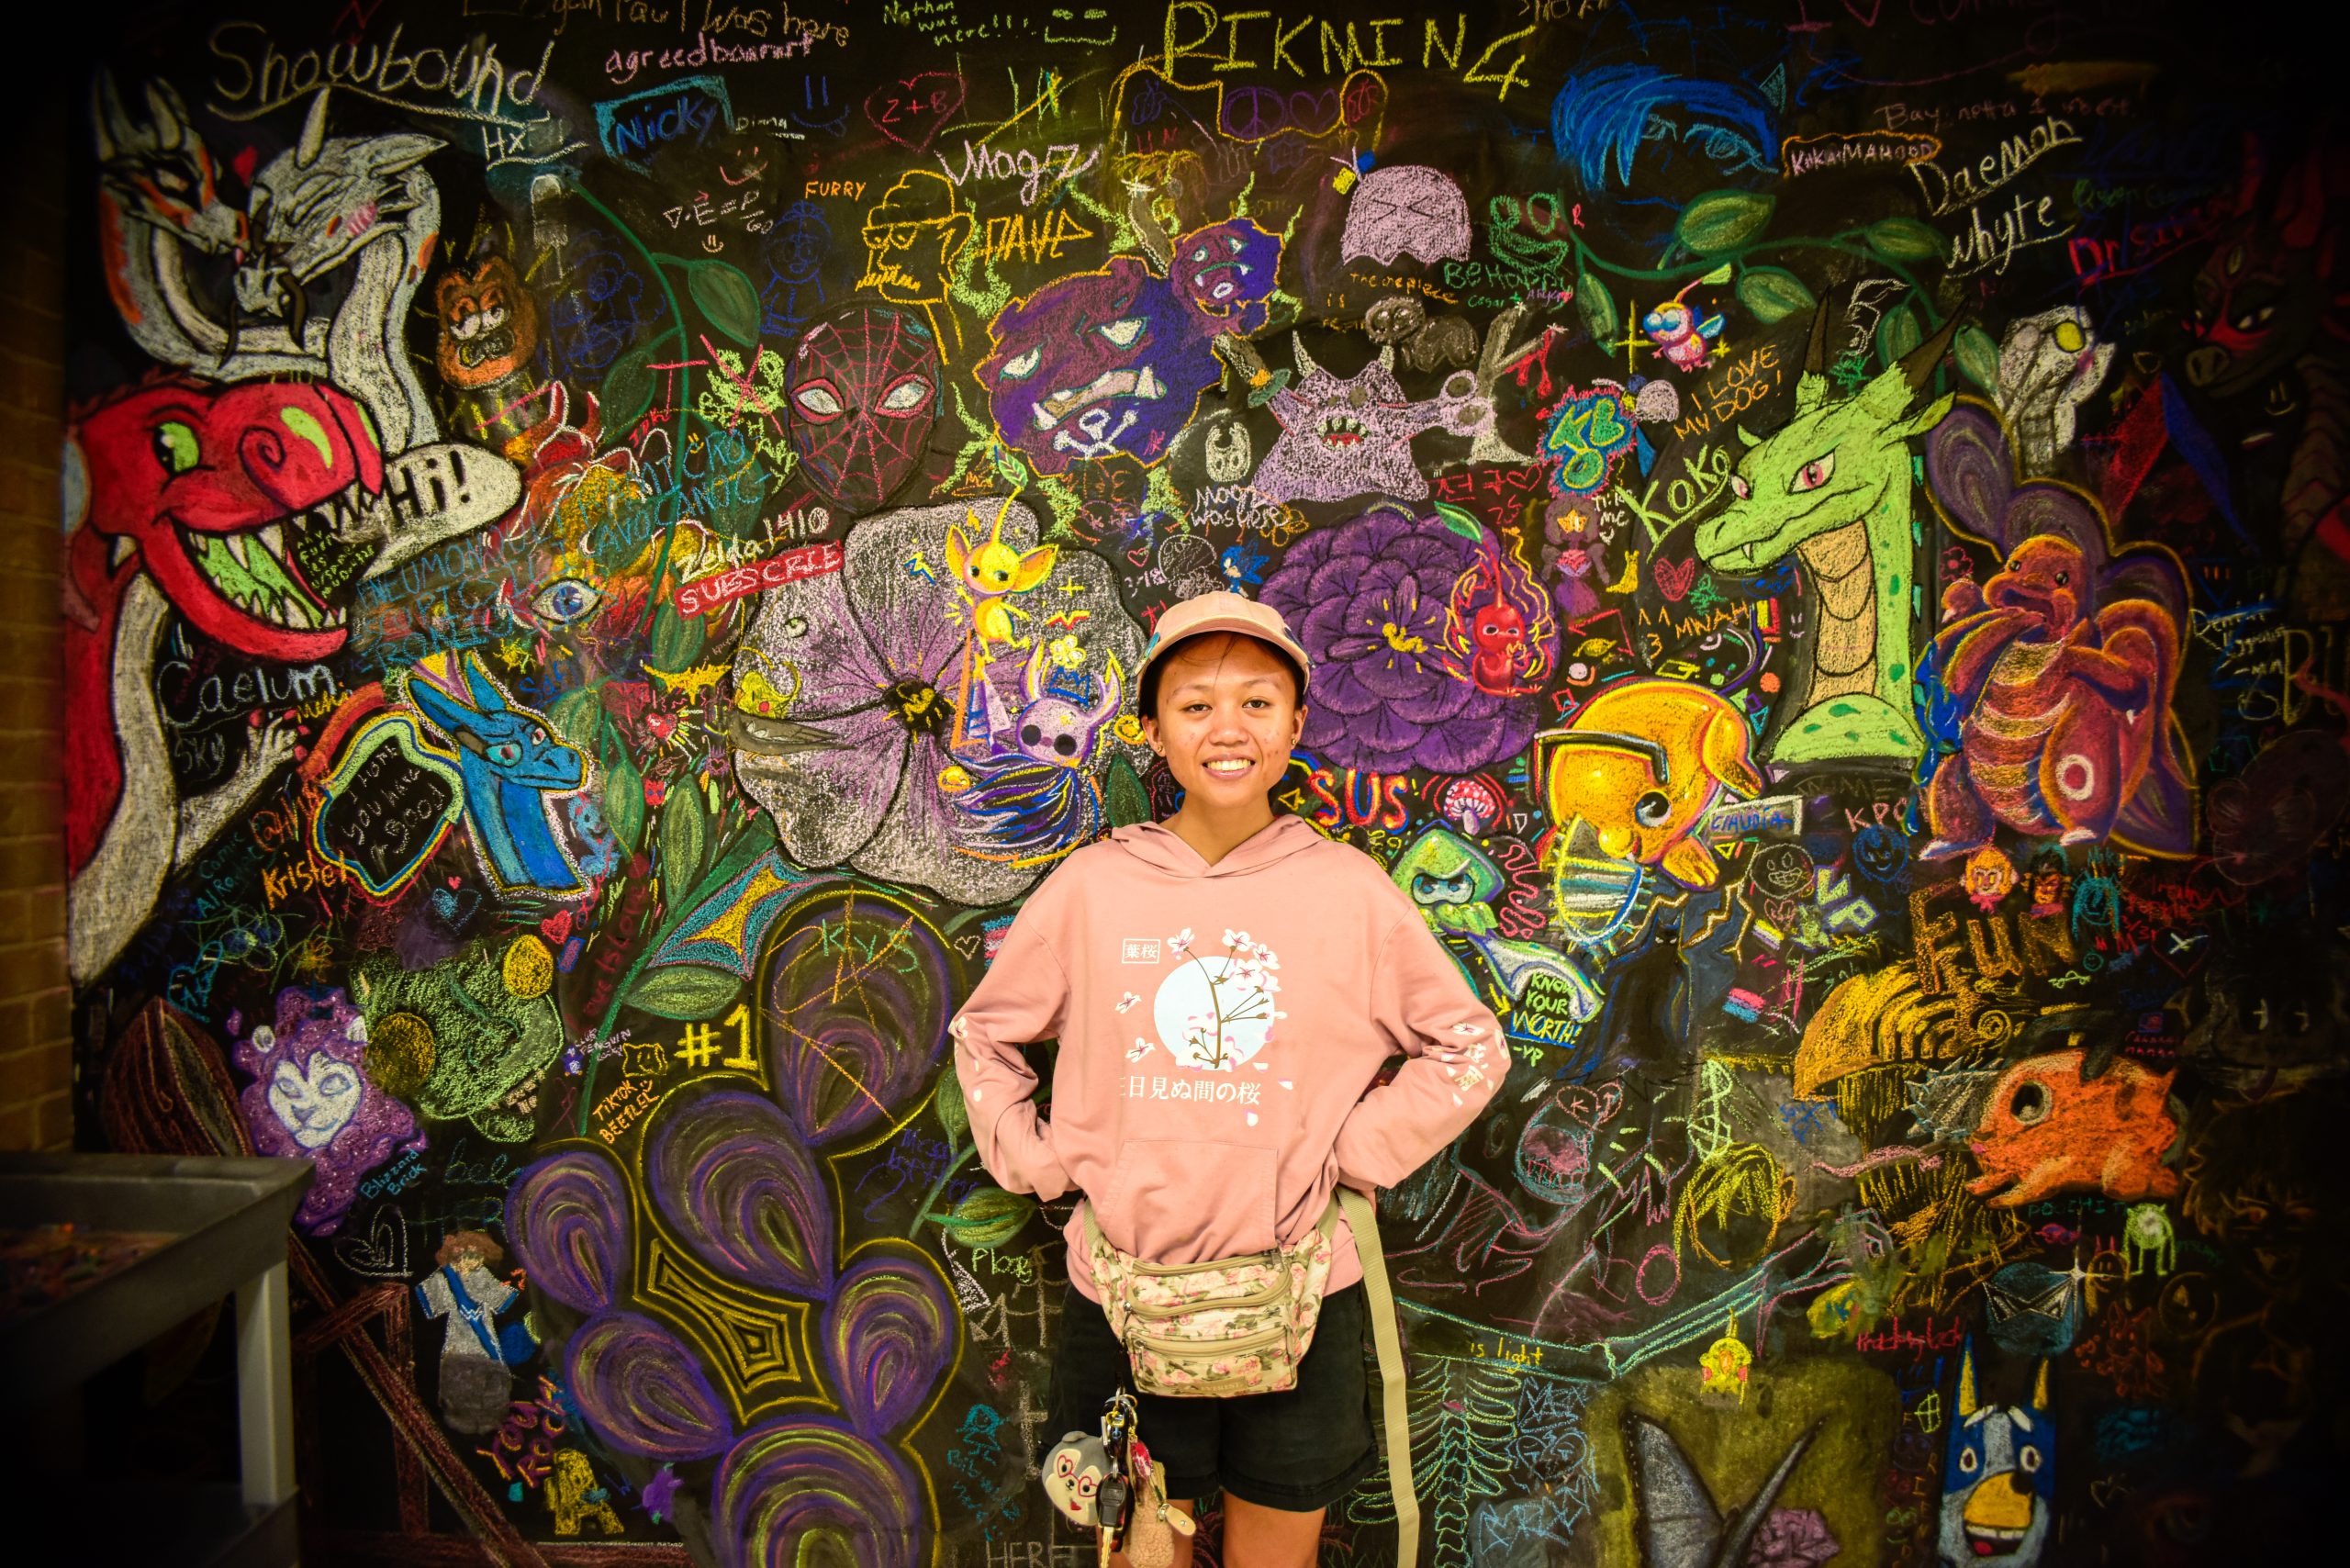 Alex Hoben/The Collegian NE student Mena Kennedy stands in front of the chalkboard wall that is available for students and staff to draw on in NFAB.